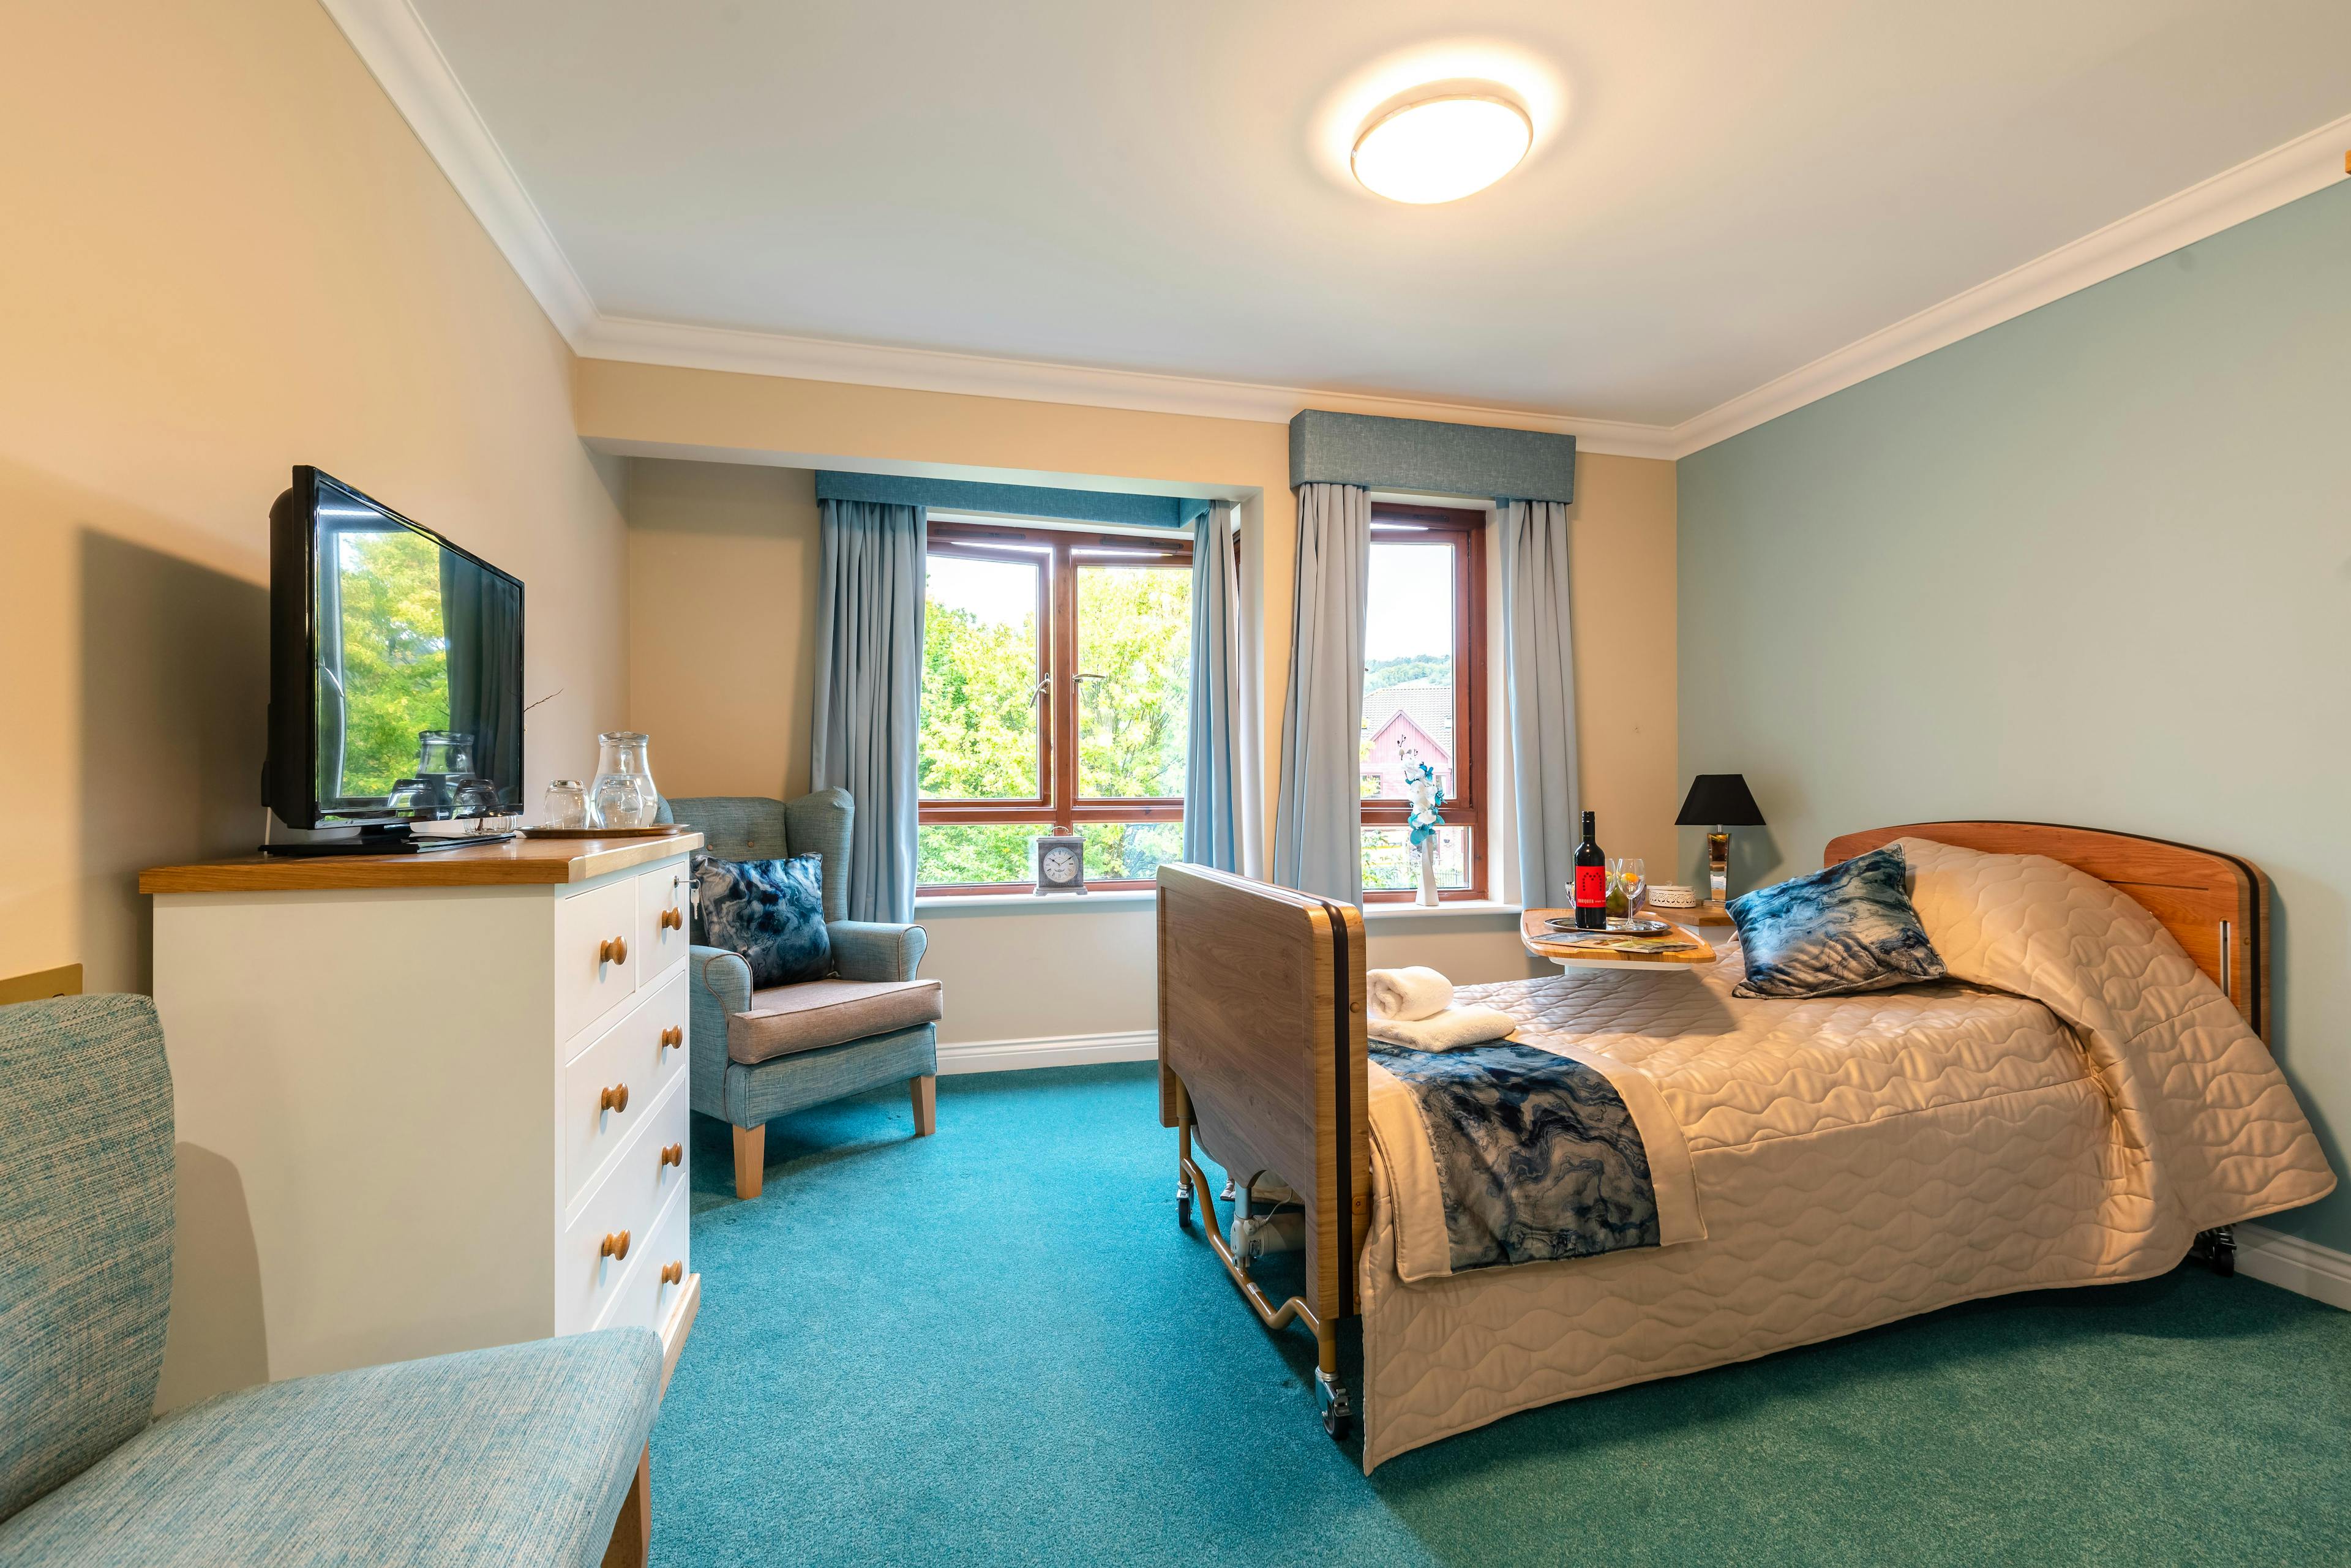 Bedroom at Tandridge Heights Care Home in Oxted, Surrey